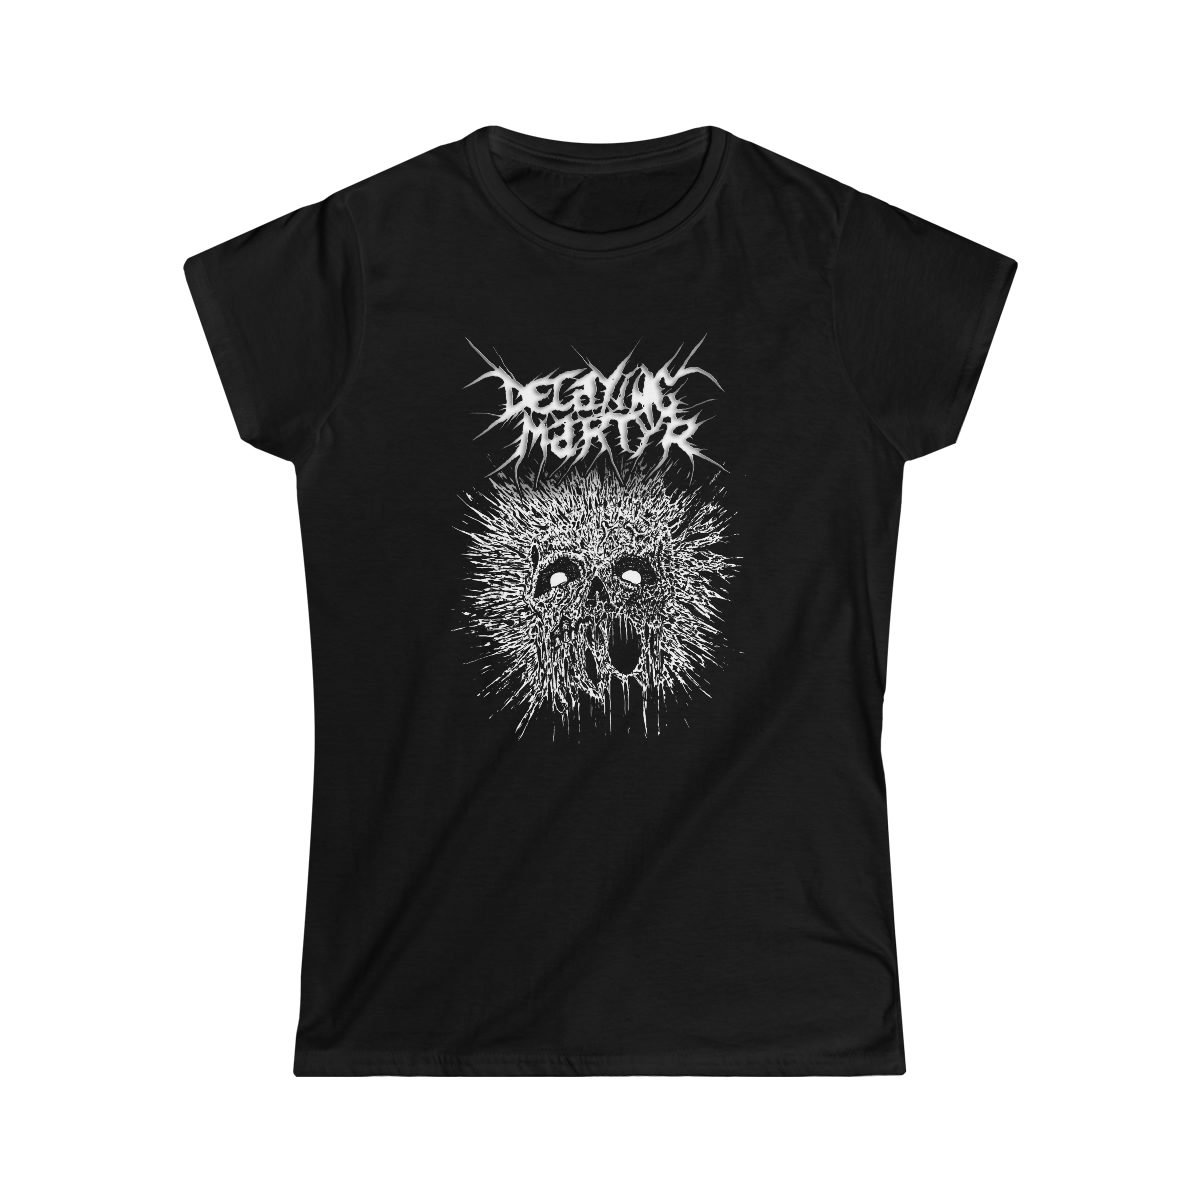 Decaying Martyr – Martyr’s Cry Women’s Short Sleeve Tshirt 64000L